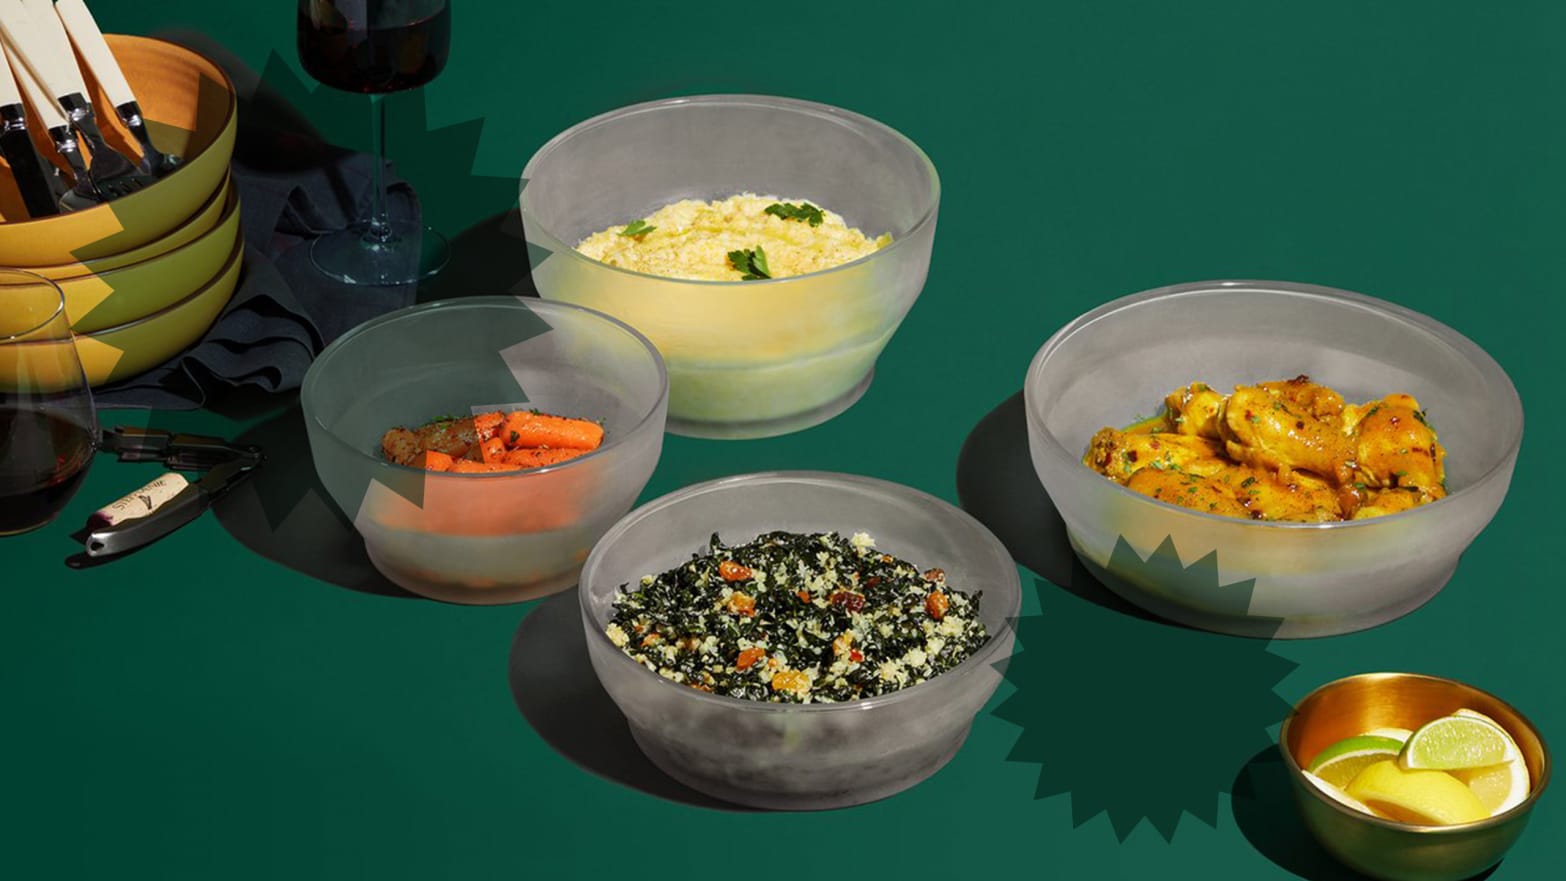 Anyday's The Everyday Set Microwave Cookware Review